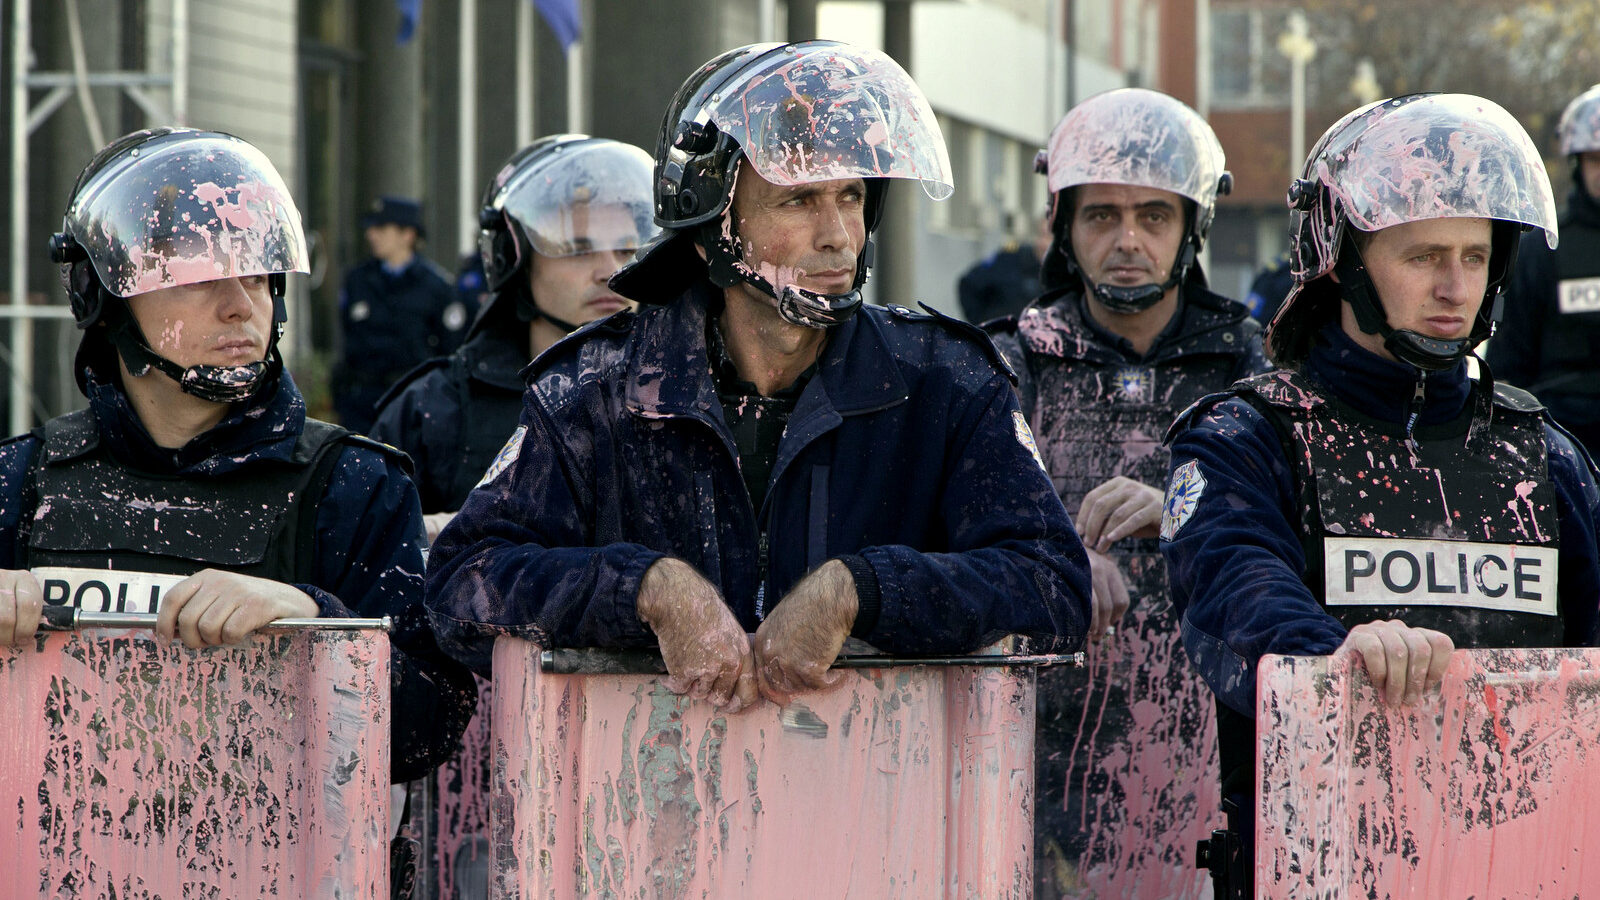 Kosovo police in riot gear are seen covered in pink paint after clashes outside Kosovo parliament building in the capital Pristina on Tuesday, Nov. 17, 2015. Kosovo opposition used tear gas and pepper spray inside parliament and pelted police with rocks and pink paint outside the building in another attempt to force the government to renounce recent deals with Serbia and Montenegro.(AP Photo/Visar Kryeziu)